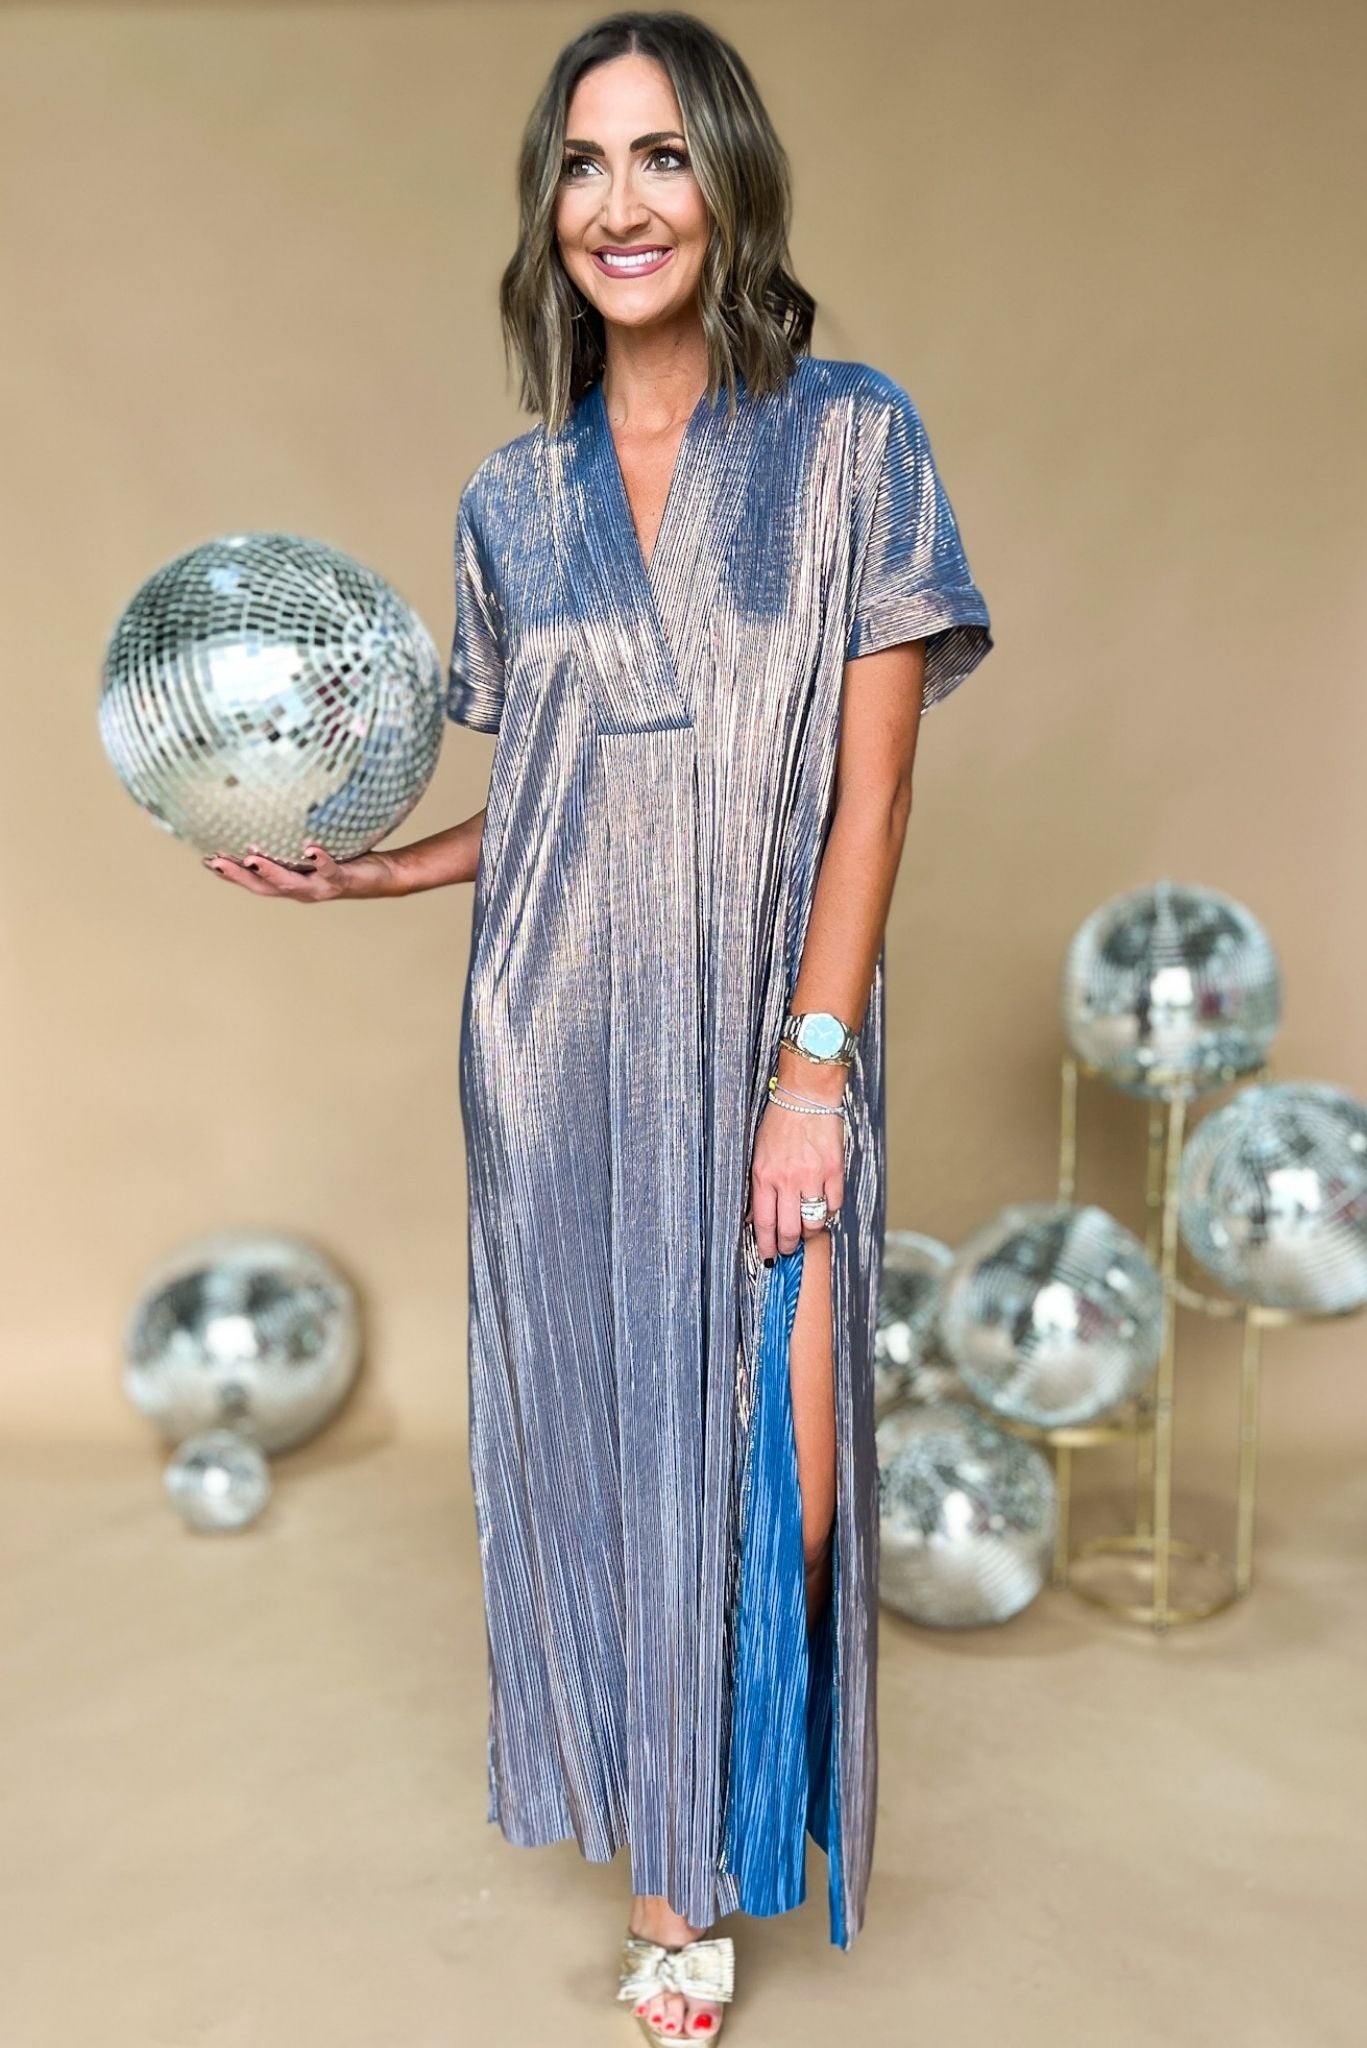 Blue Metallic V Neck Kaftan Slit Dress by Karlie, statement piece, holiday look, glam, must have, shimmer detail, flowy fit, shop style your senses by mallory fitzsimmons 